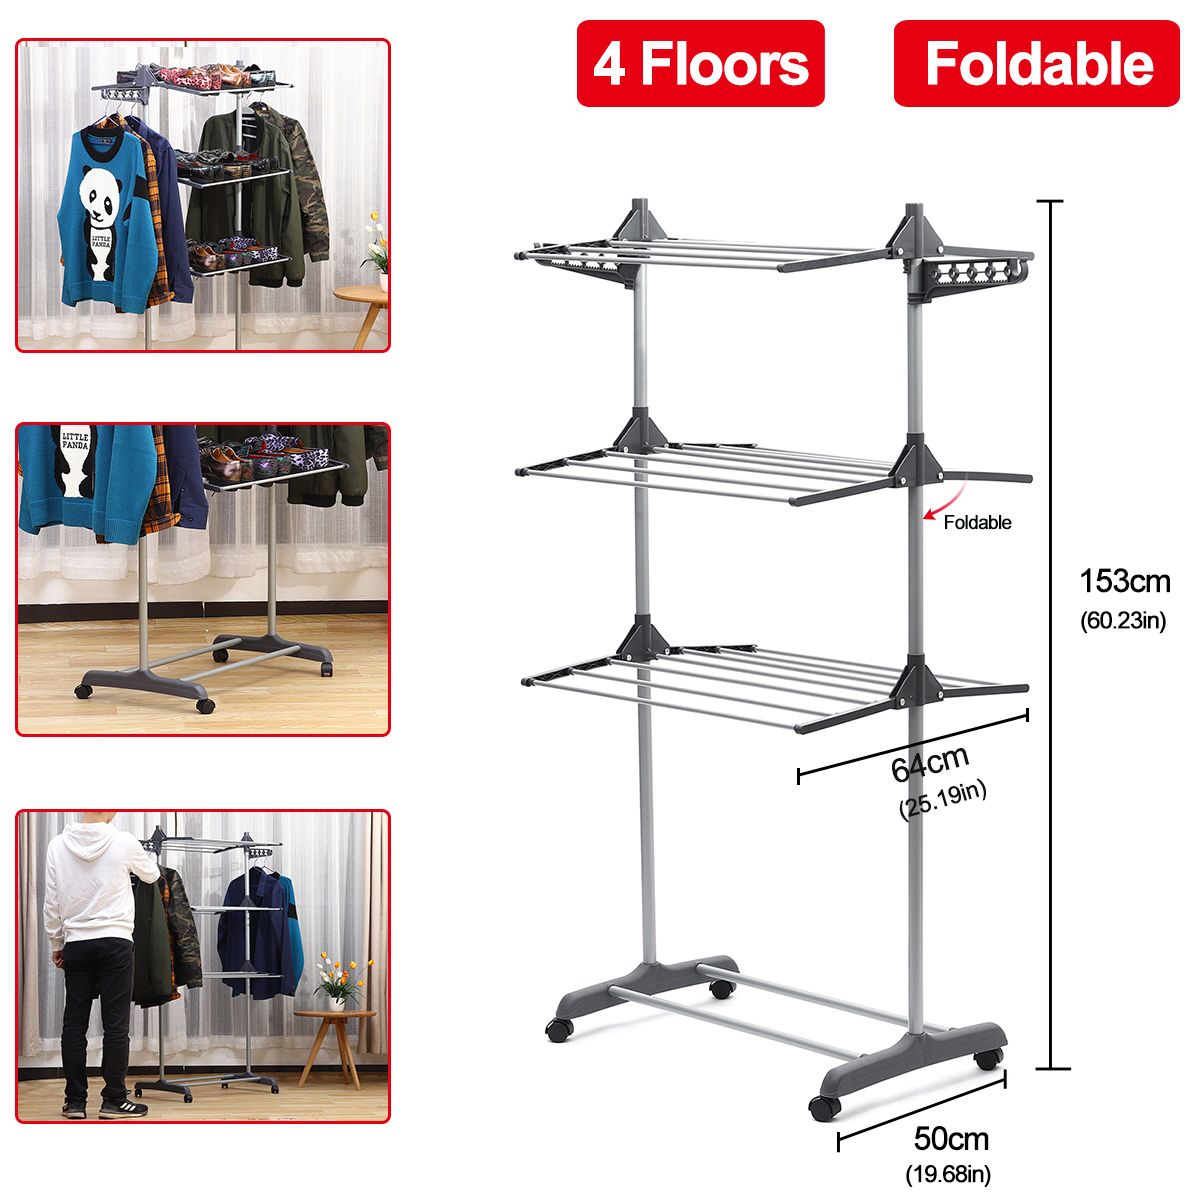 4-Floors-Foldable-Clothes-Drying-Rack-With-4-Wheels-For-IndoorOutdoor-Use-1709596